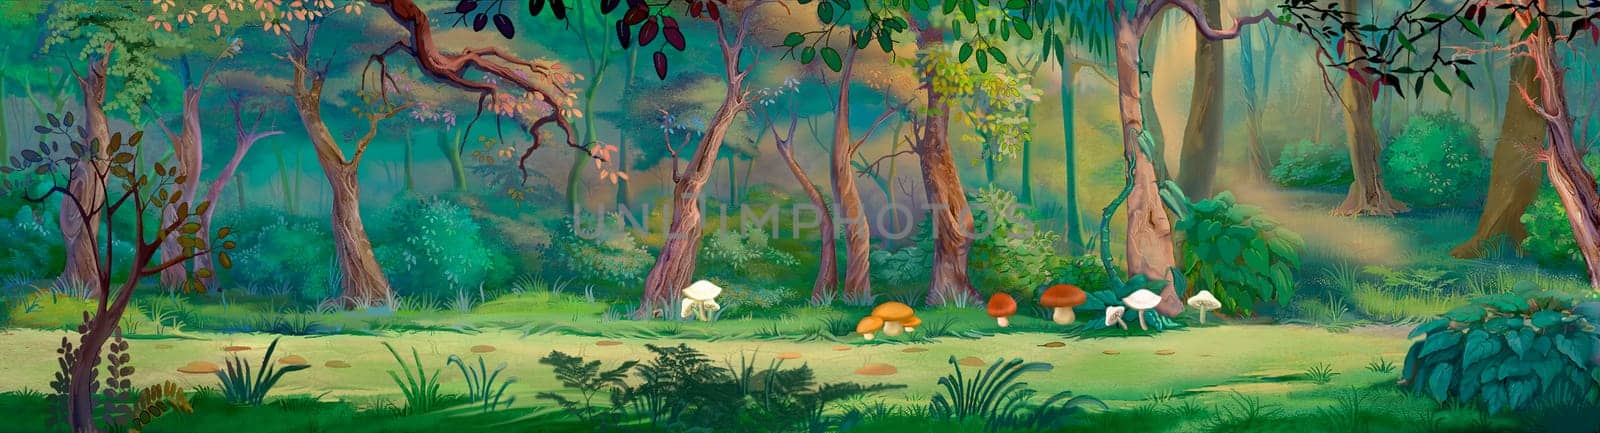 Mushrooms on a forest glade illustration by Multipedia